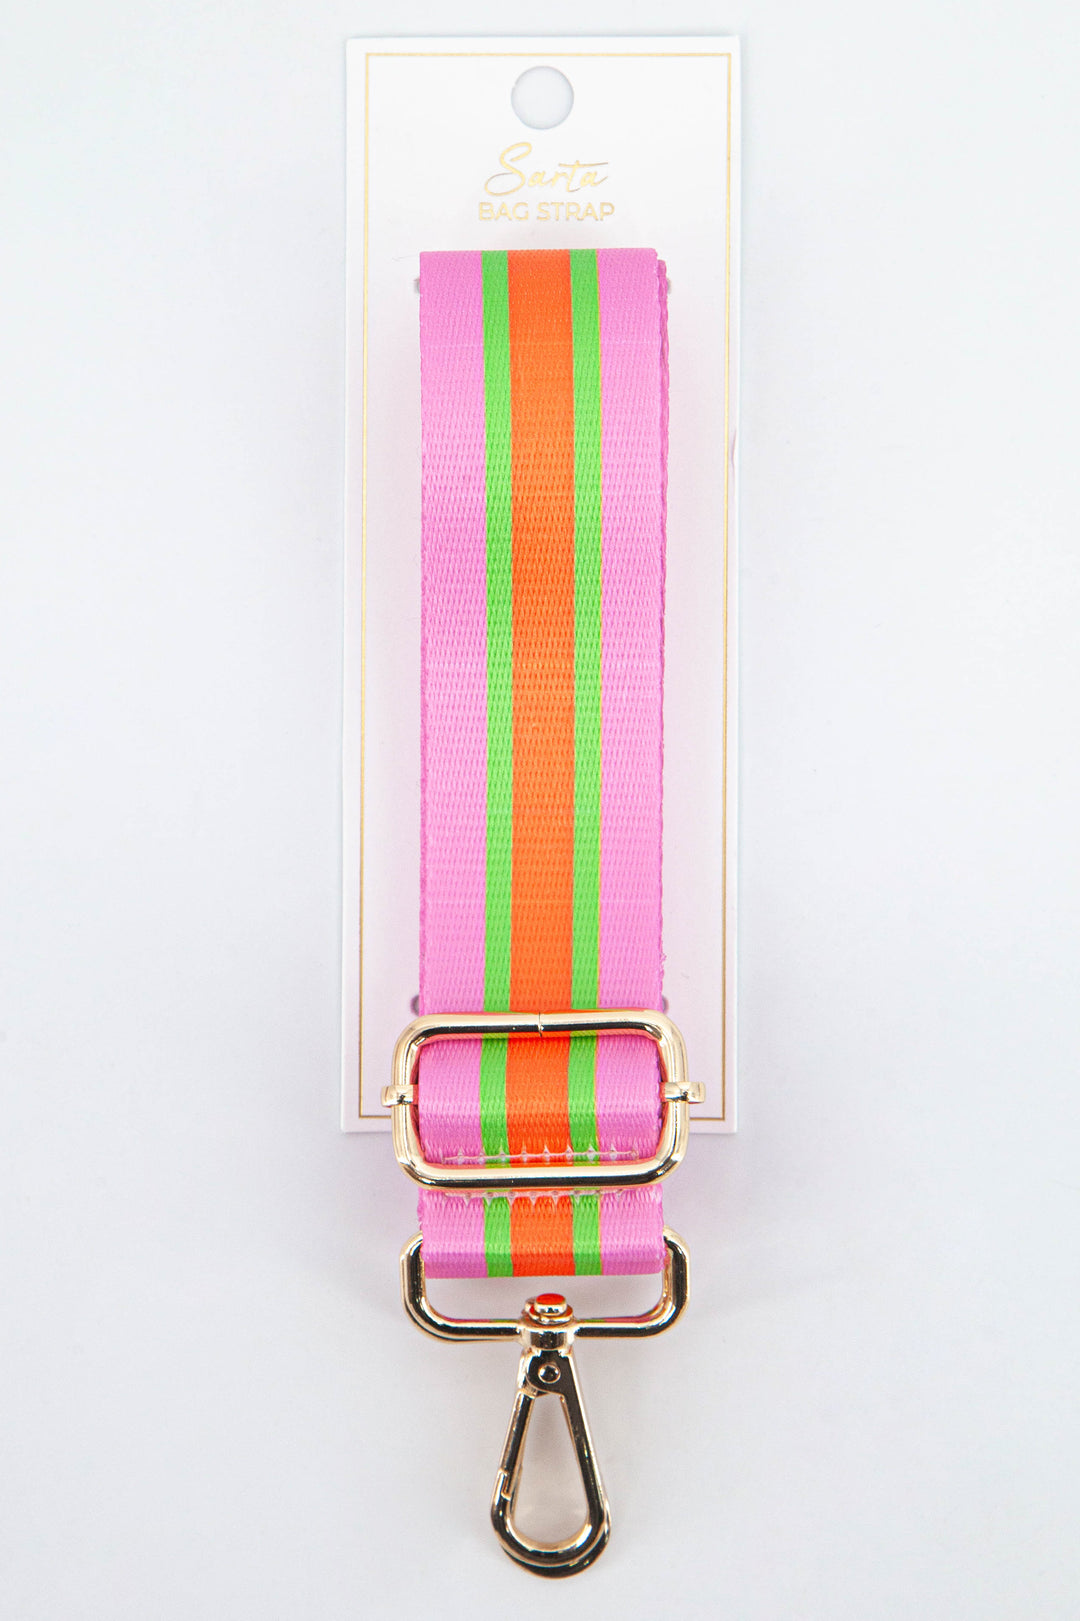 pink, orange and green striped bag strap with gold hardware